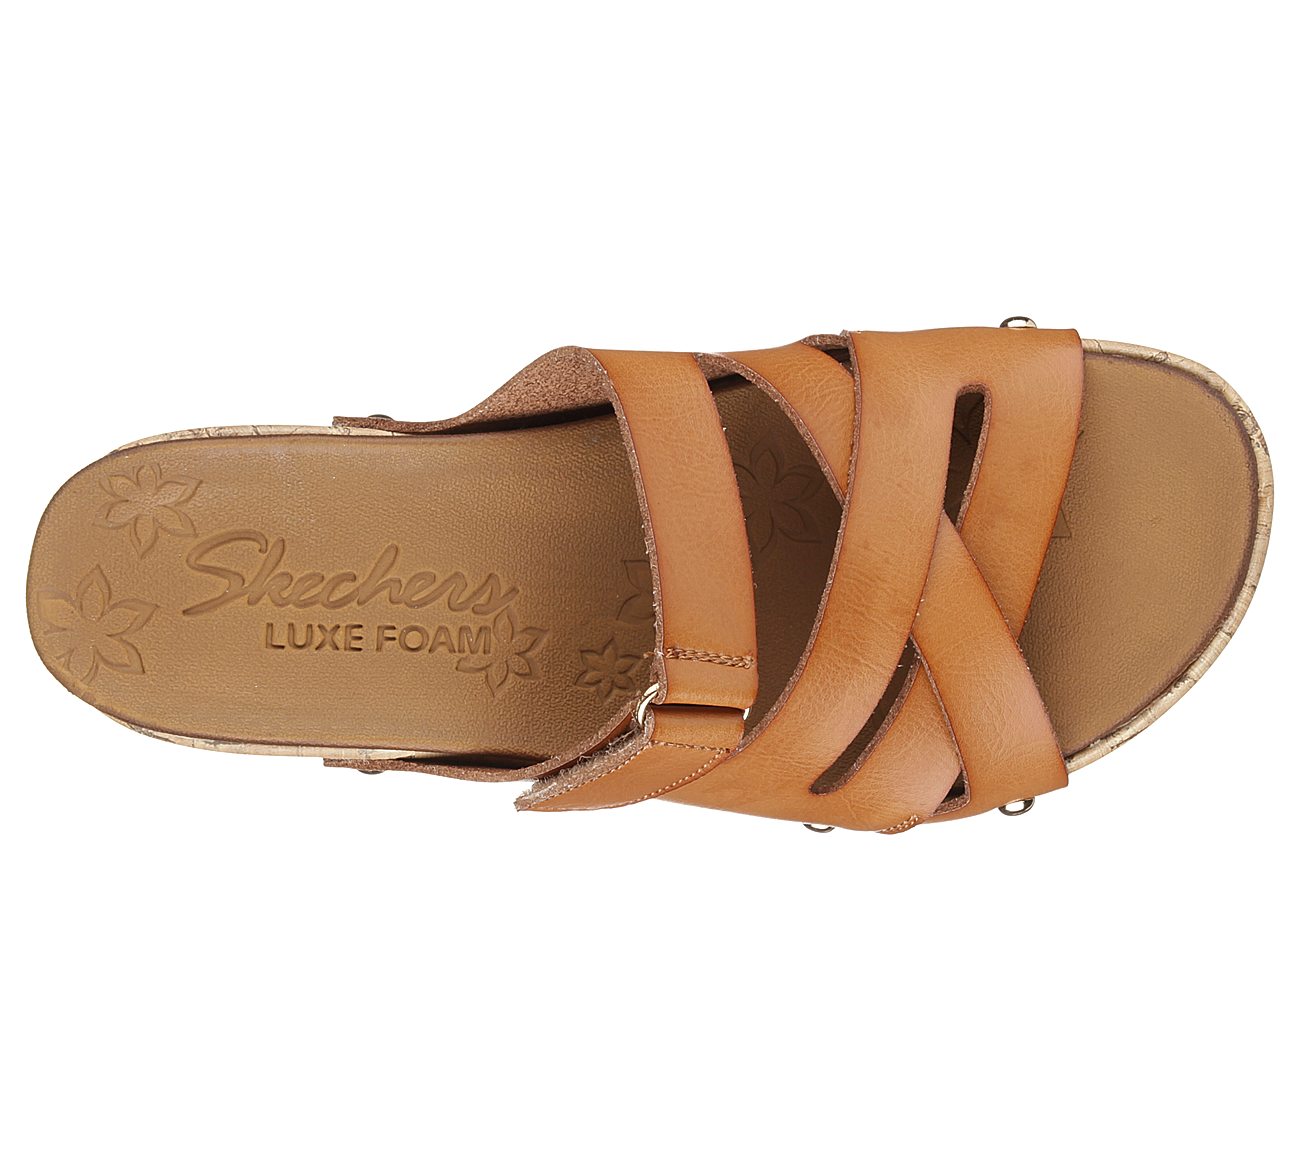 skechers tan sandals Sale,up to 40 